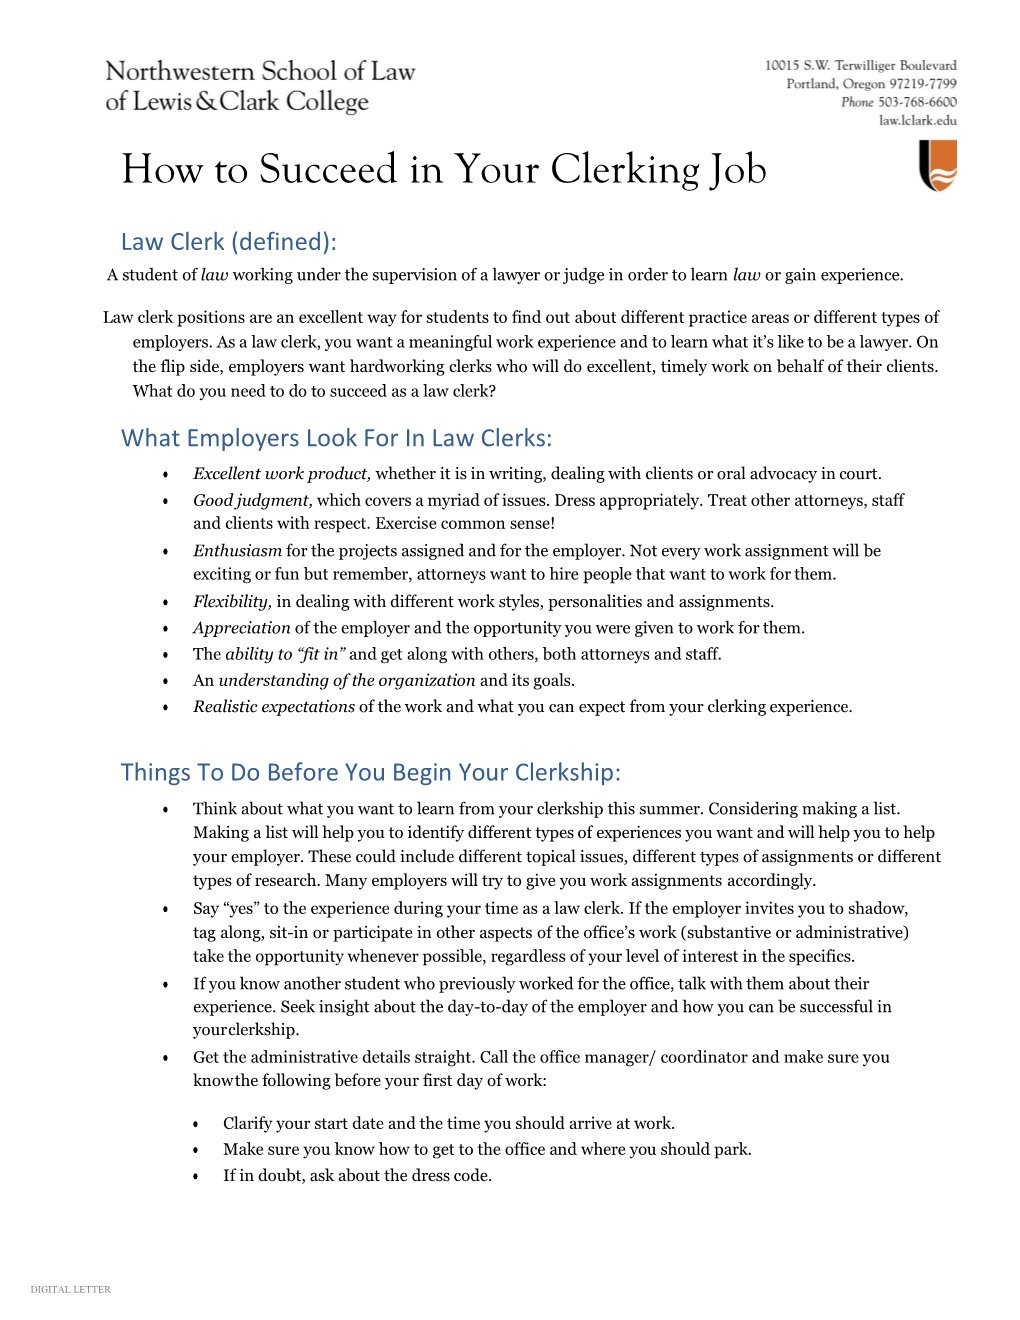 How to Succeed in Your Clerking Job